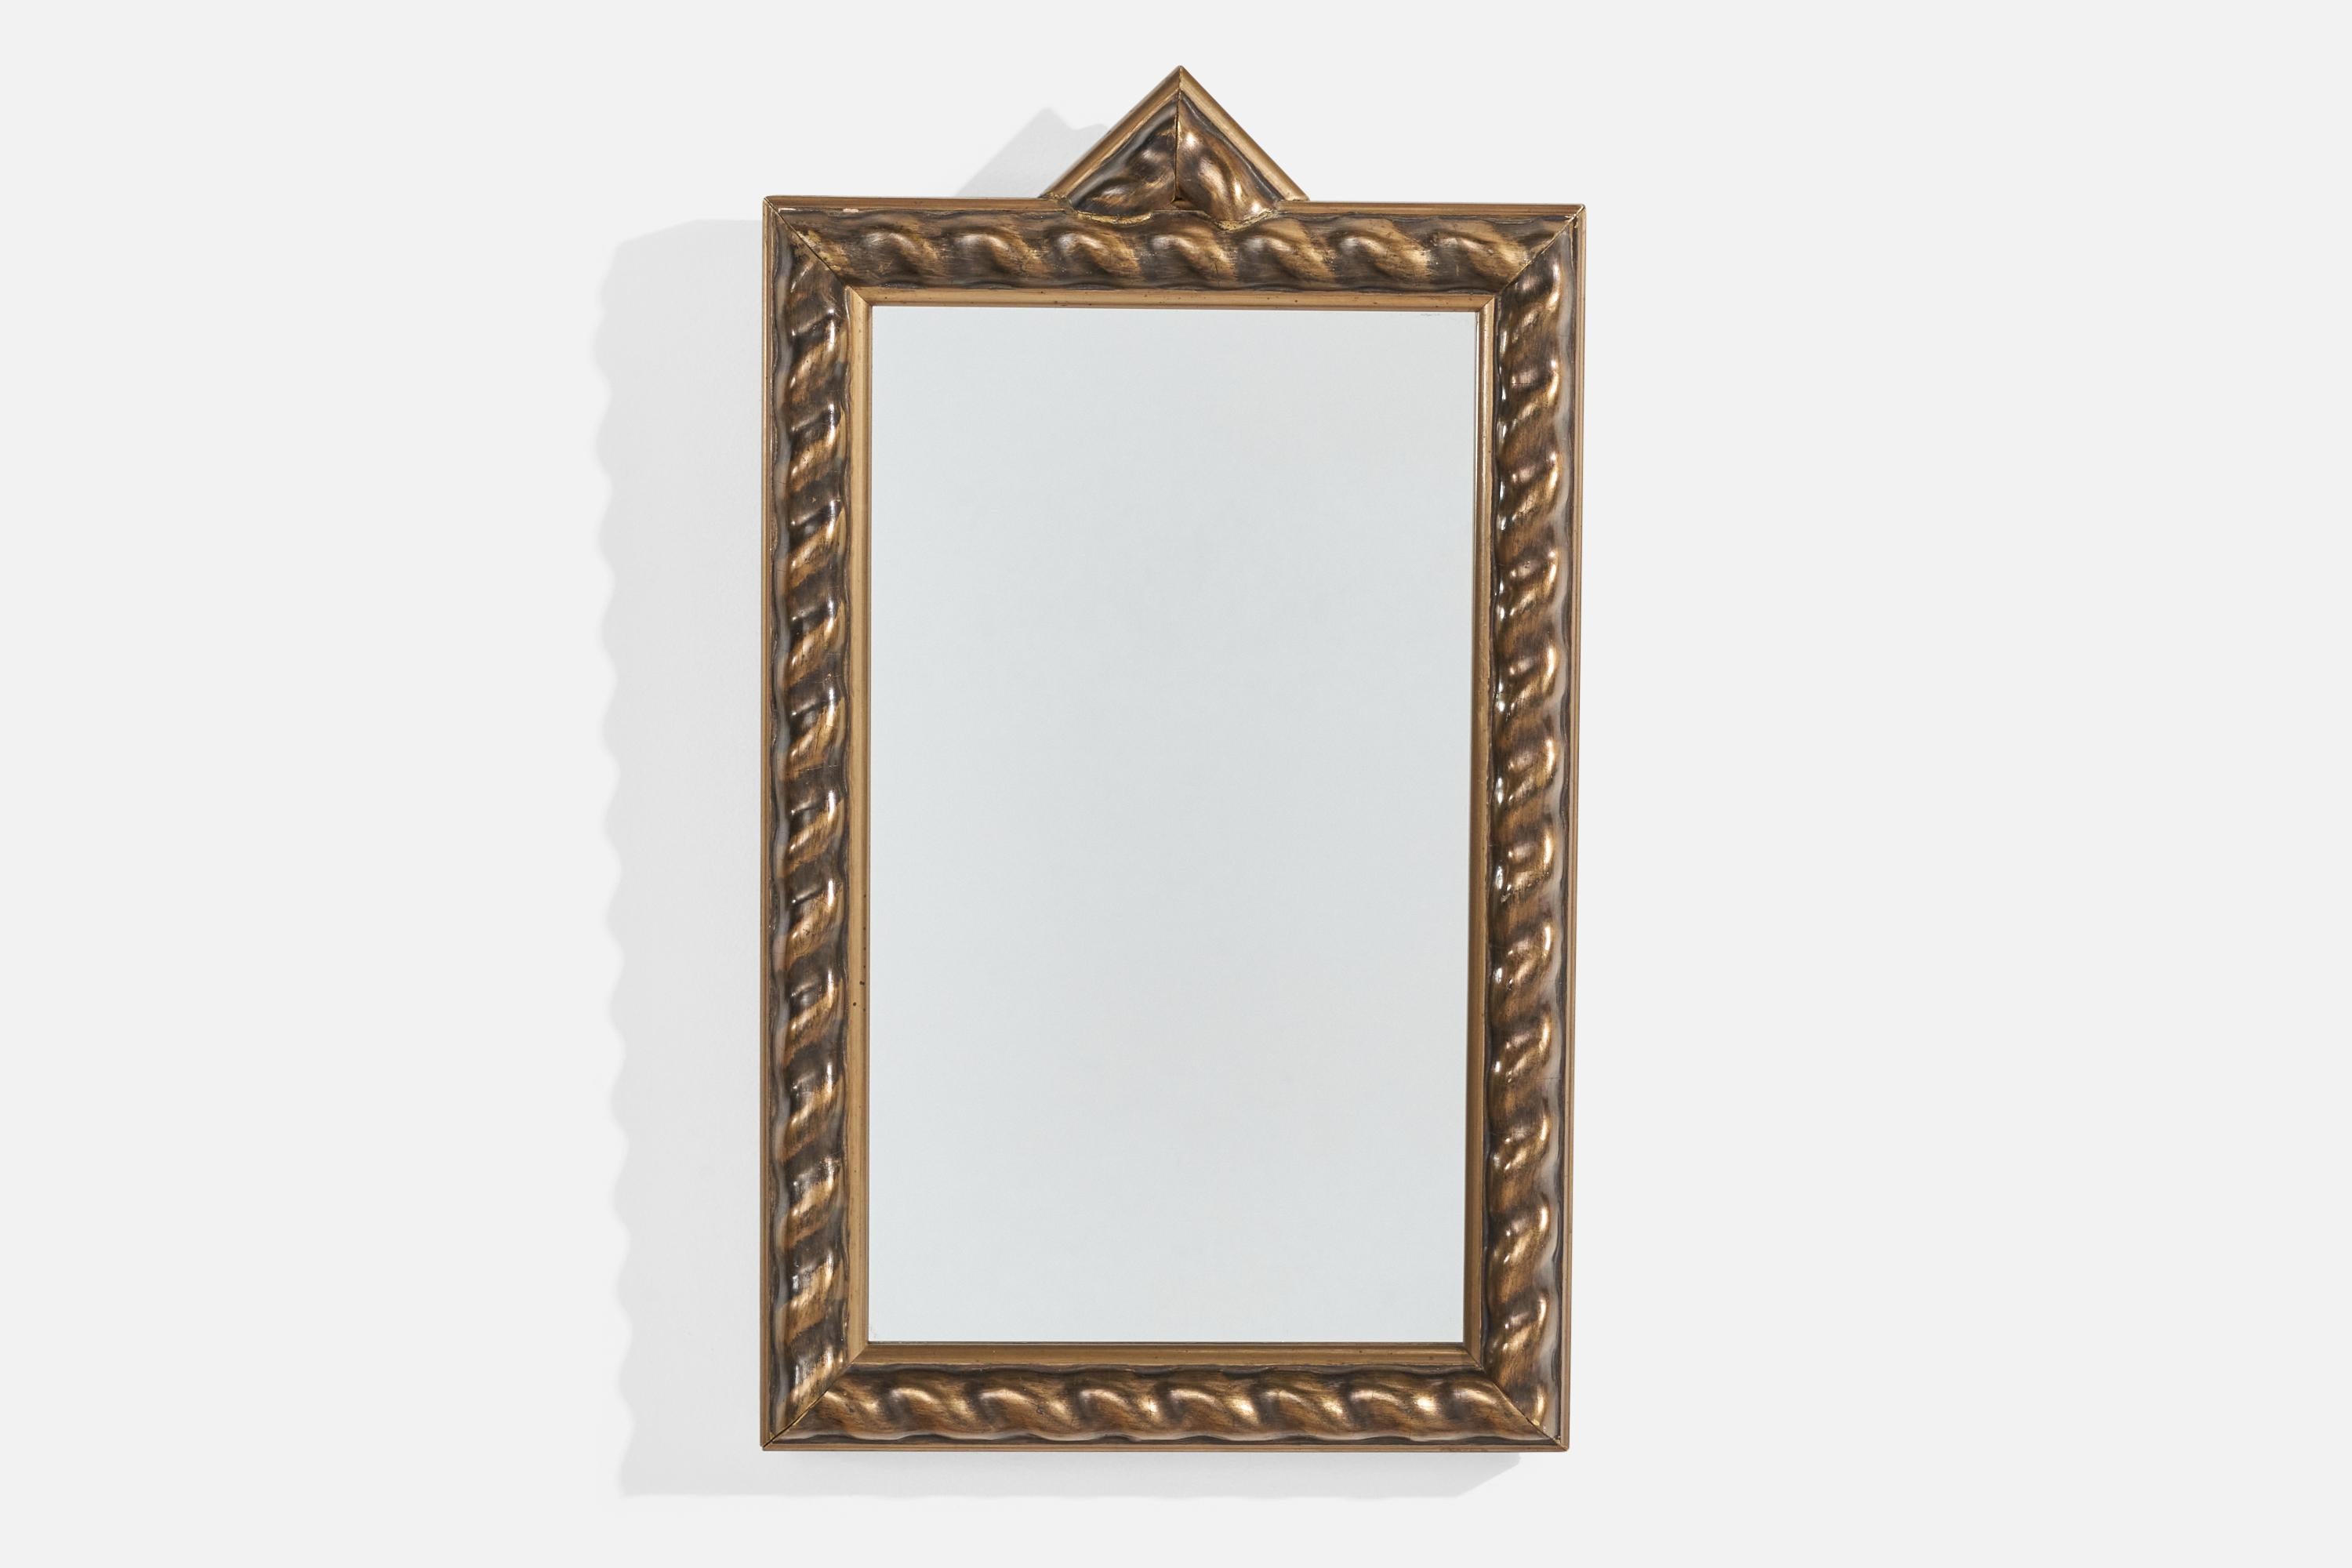 A gilt wood wall mirror designed and produced in Sweden, c. 1940s.

